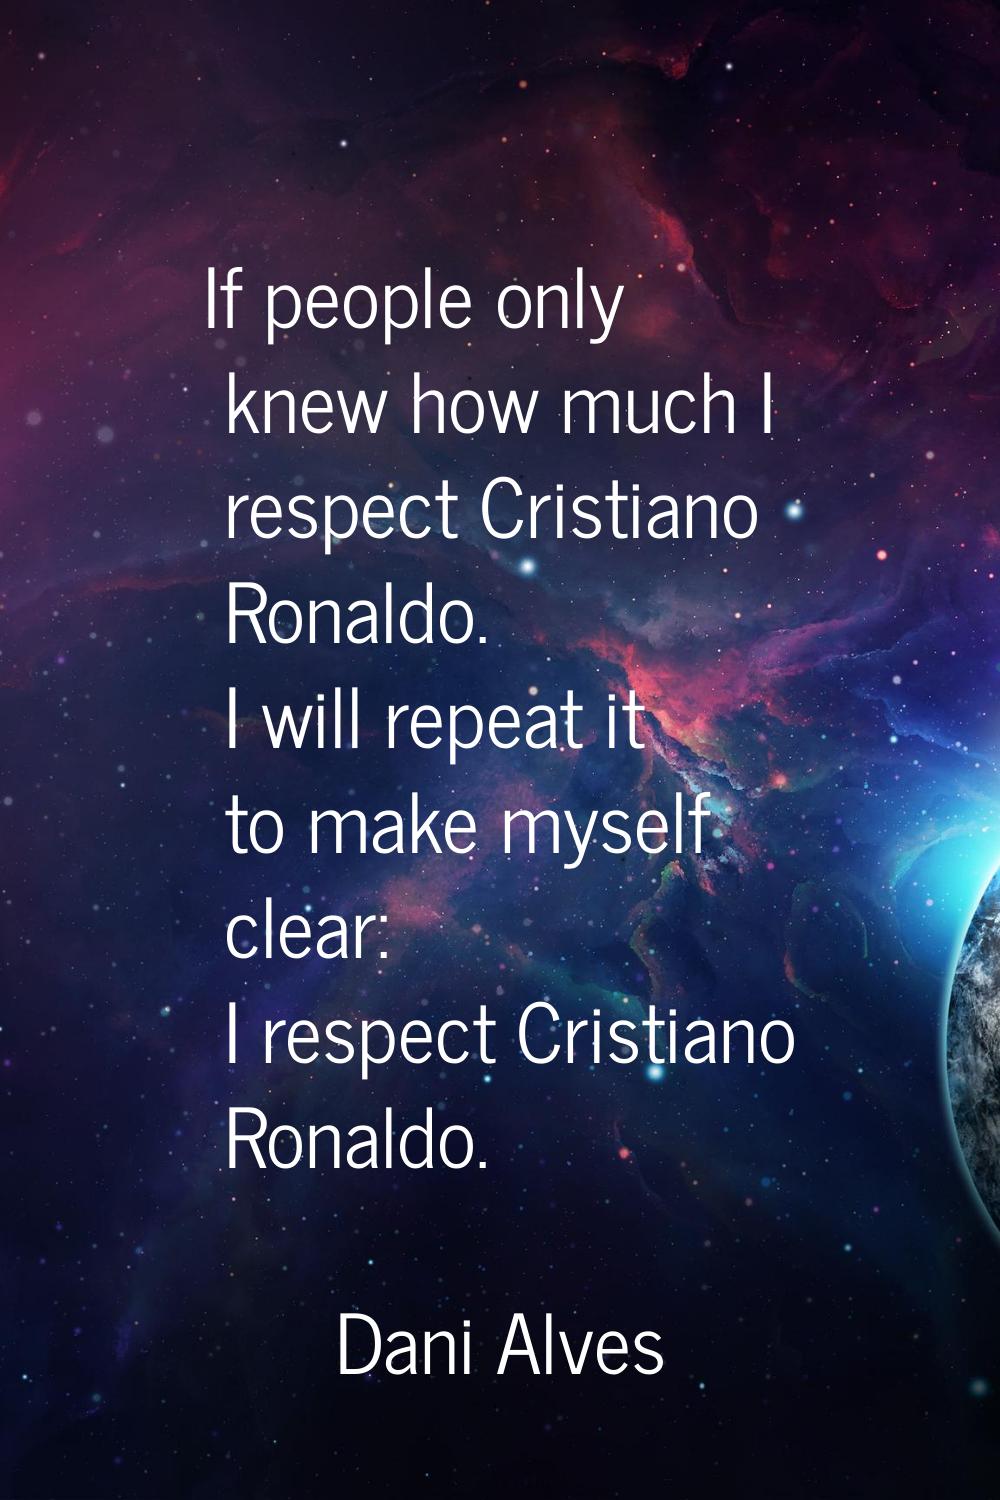 If people only knew how much I respect Cristiano Ronaldo. I will repeat it to make myself clear: I 